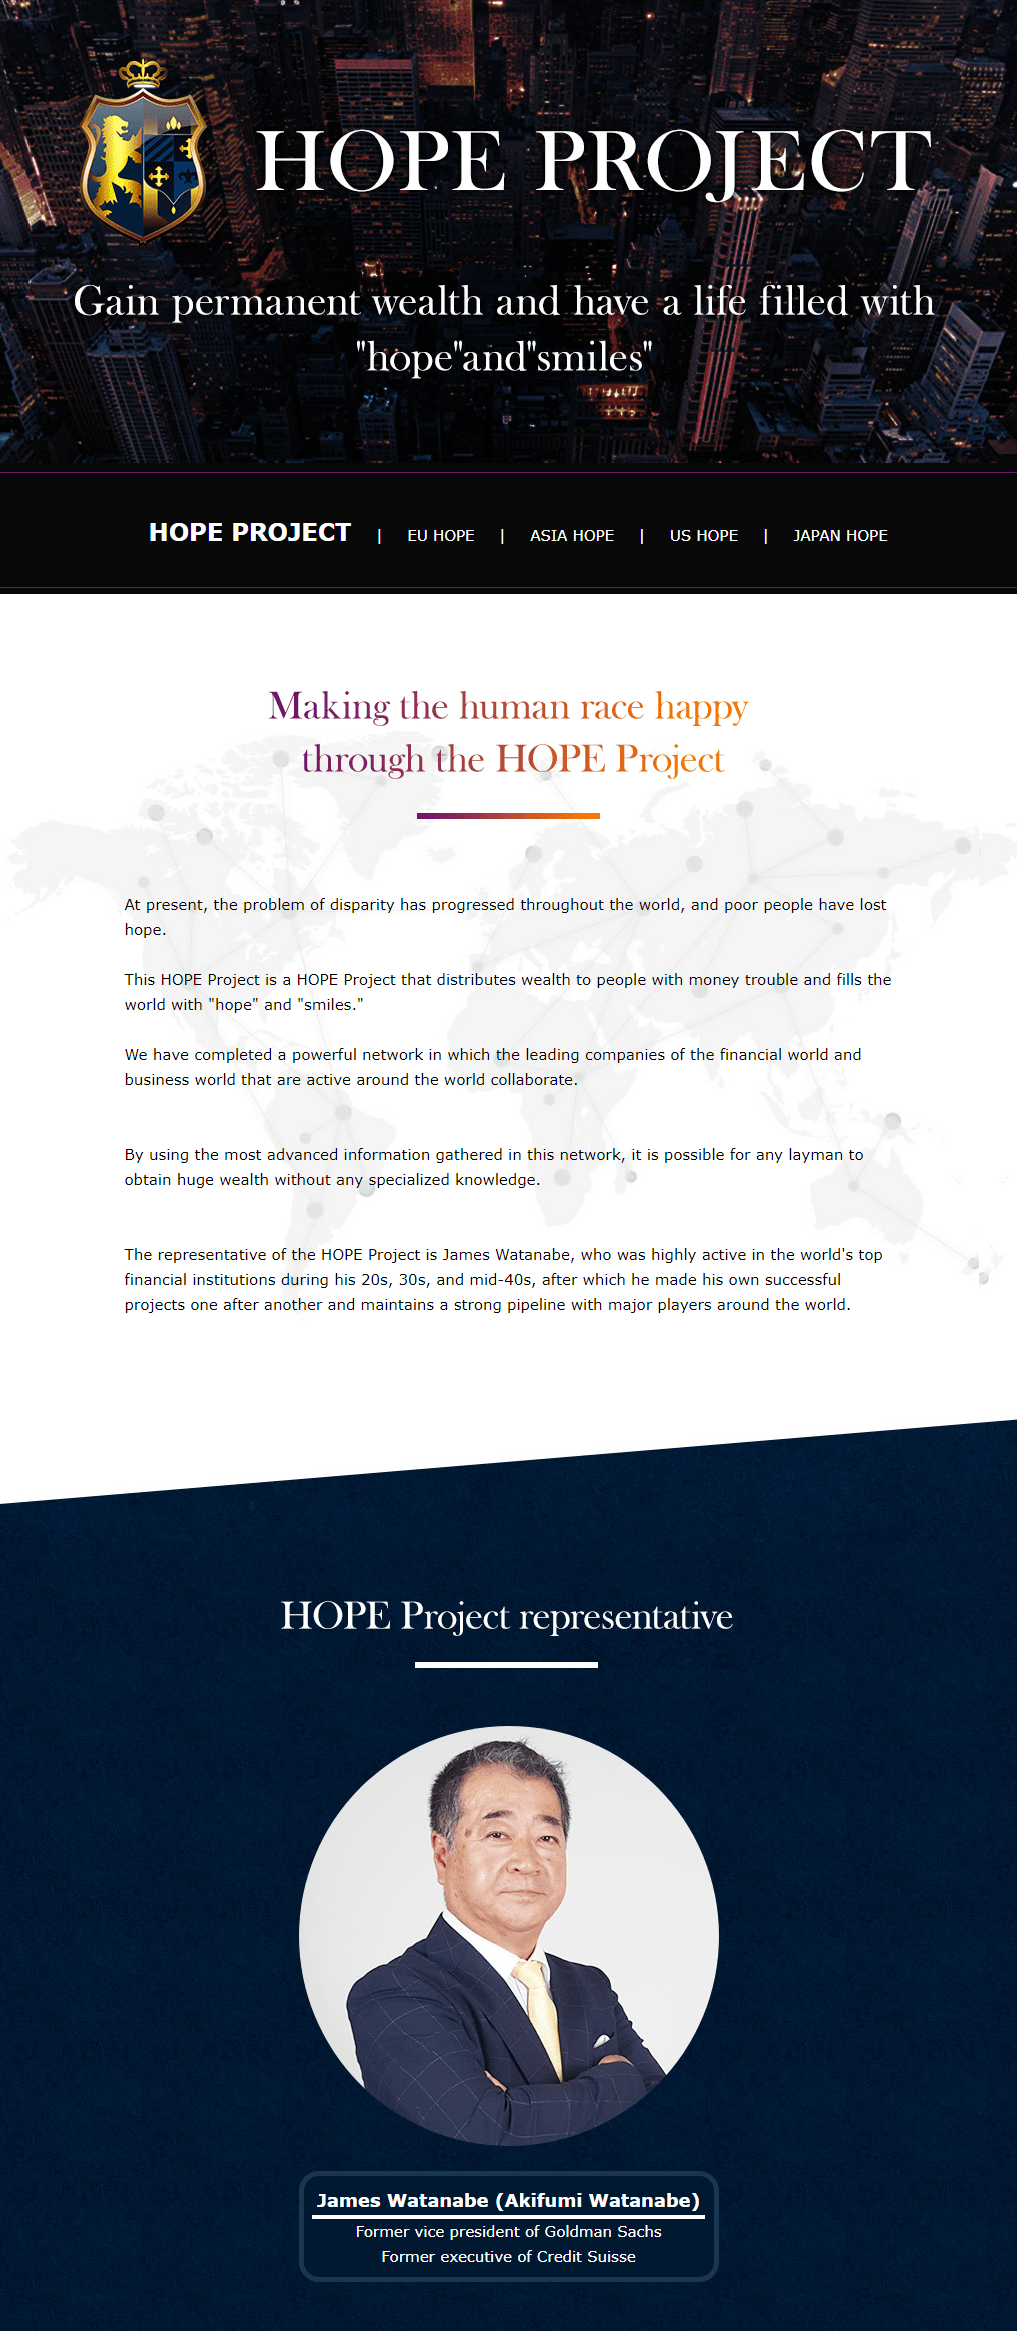 HOPE PROJECT